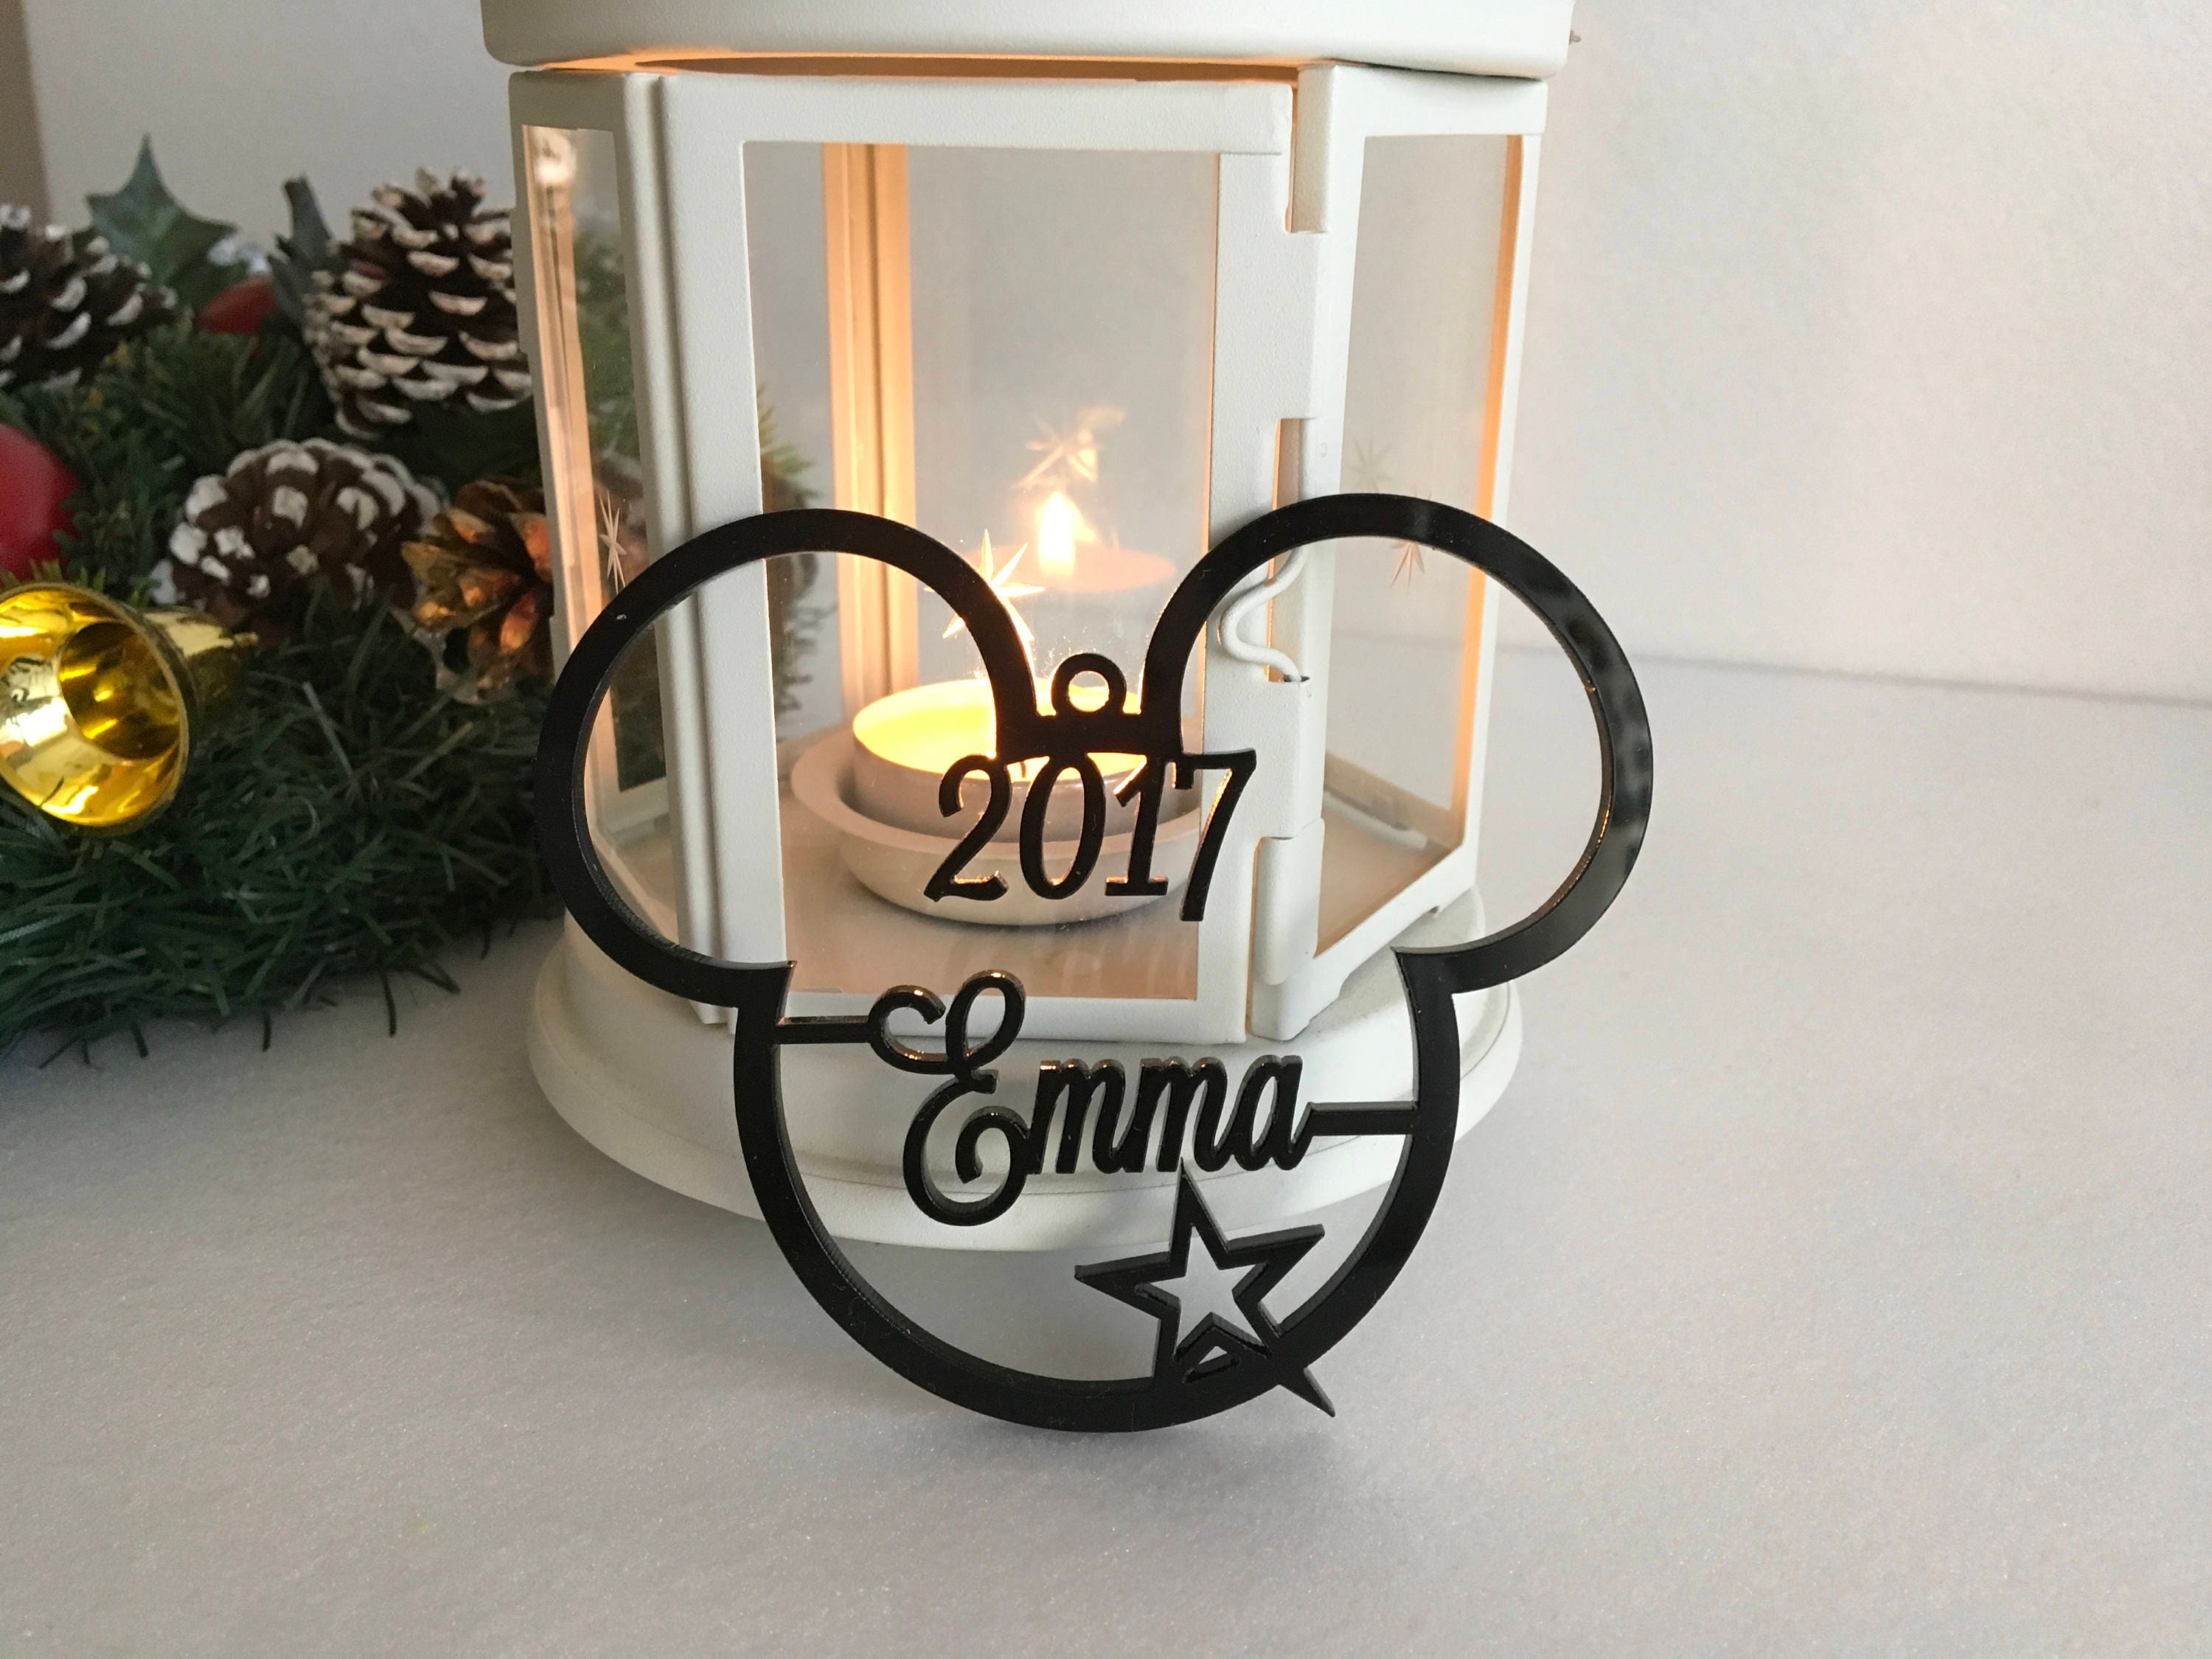 Mickey Mouse Christmas Tree Decoration 2022 Ornament Personalized Name Bauble Disney Party Favor Decor 1st Xmas 2021 Gift for Kids First Birthday Decor Hanging Cute Minnie Mouse Head Acrylic Ornaments 